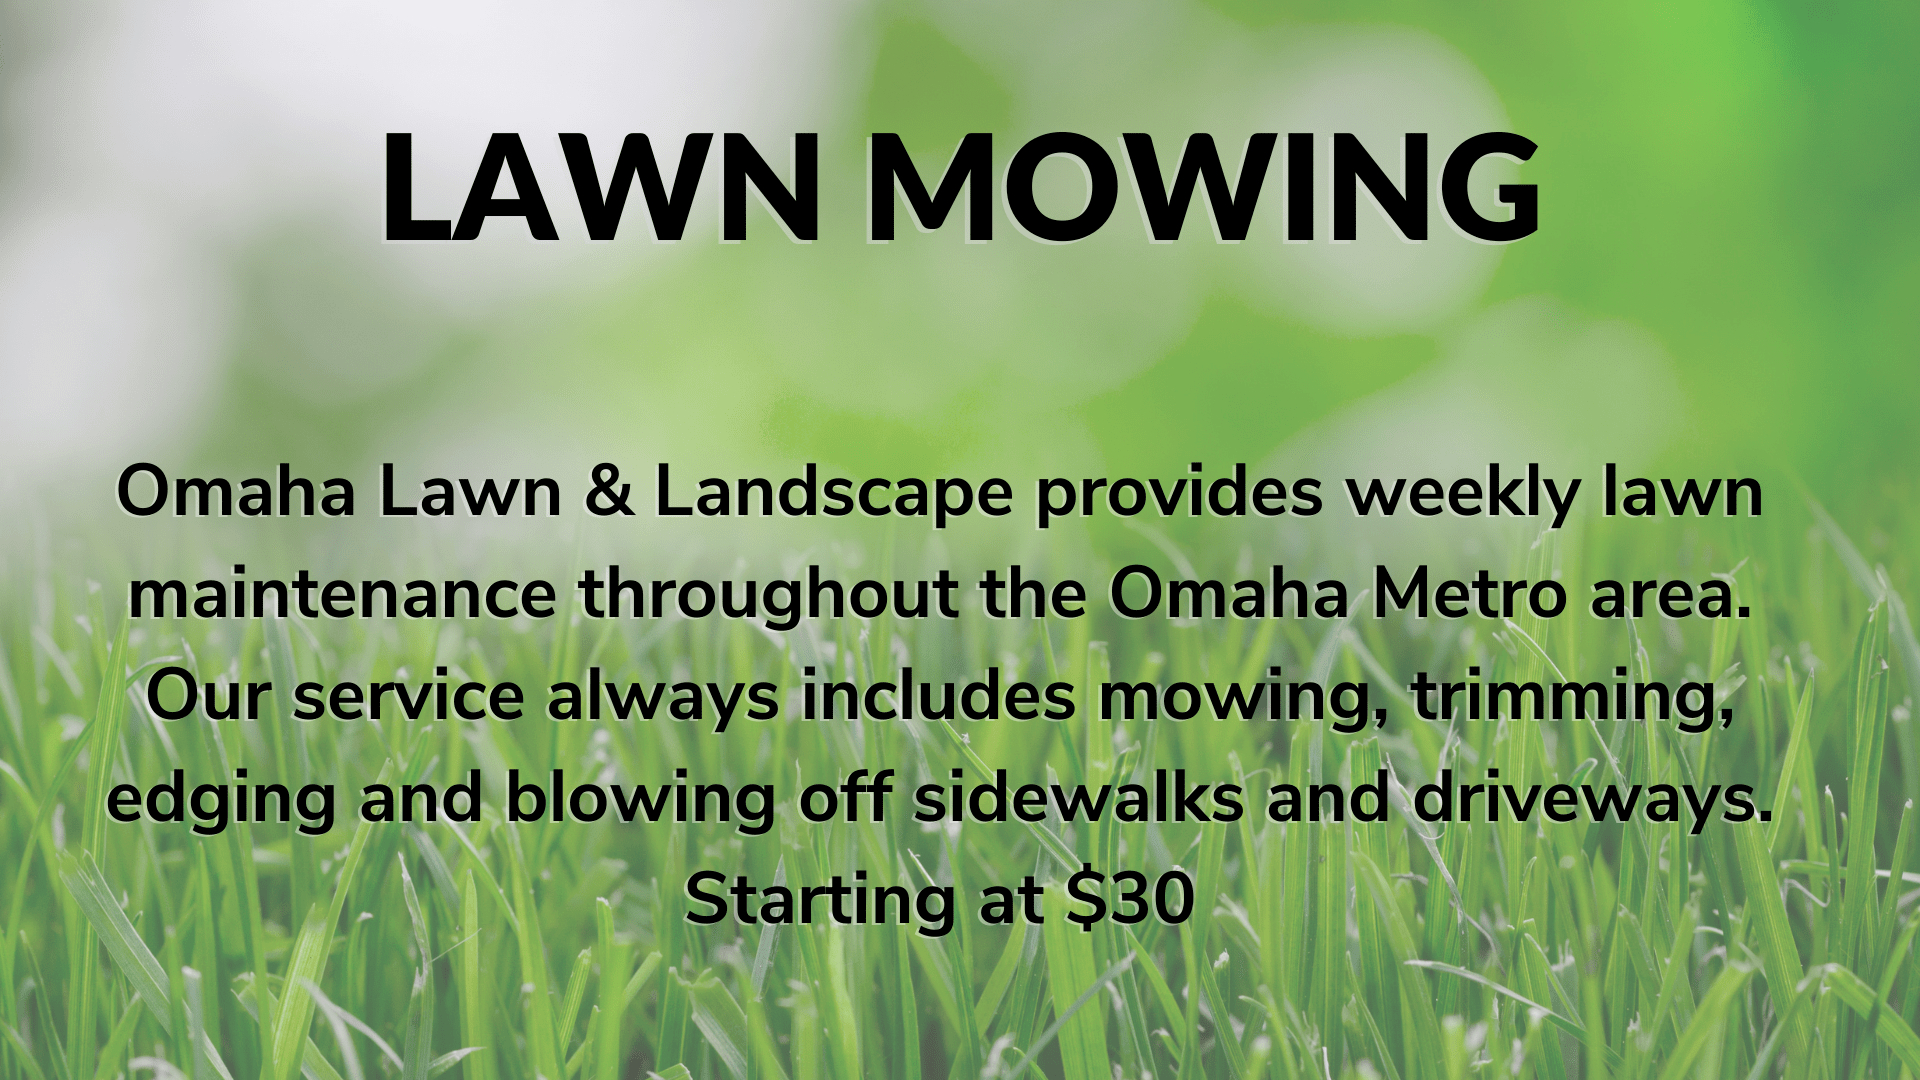 Freshly mowed grass example with text describing the high quality service offered by Omaha Lawn and Landscape.